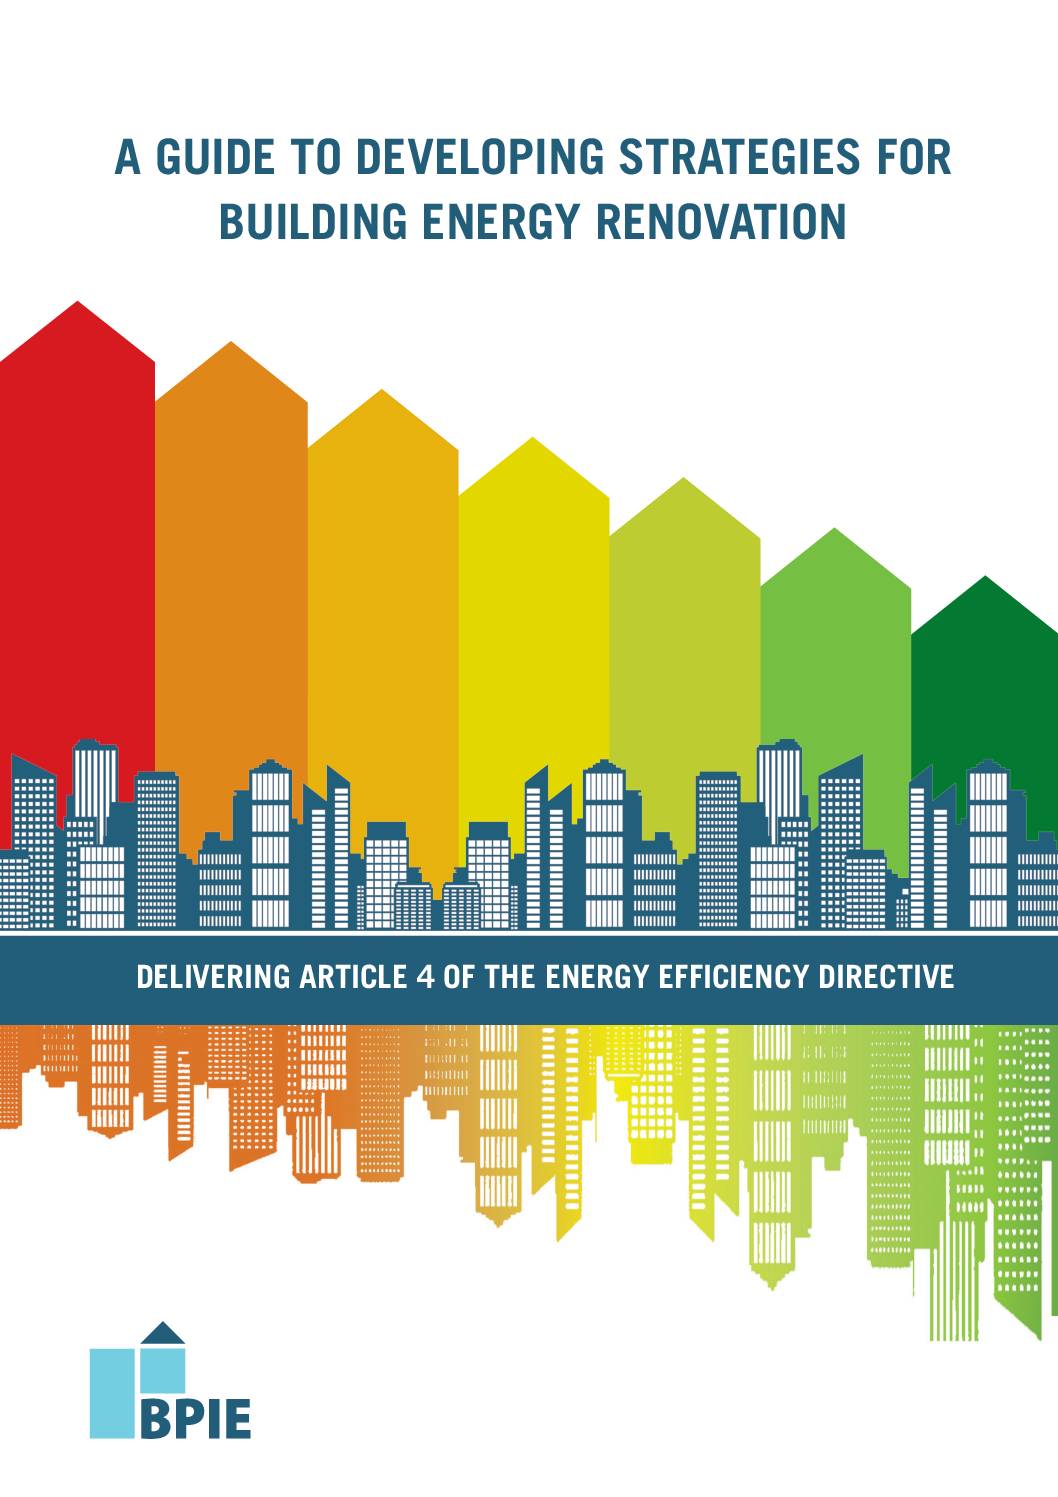 A Guide to Developing Strategies for Building Energy Renovation